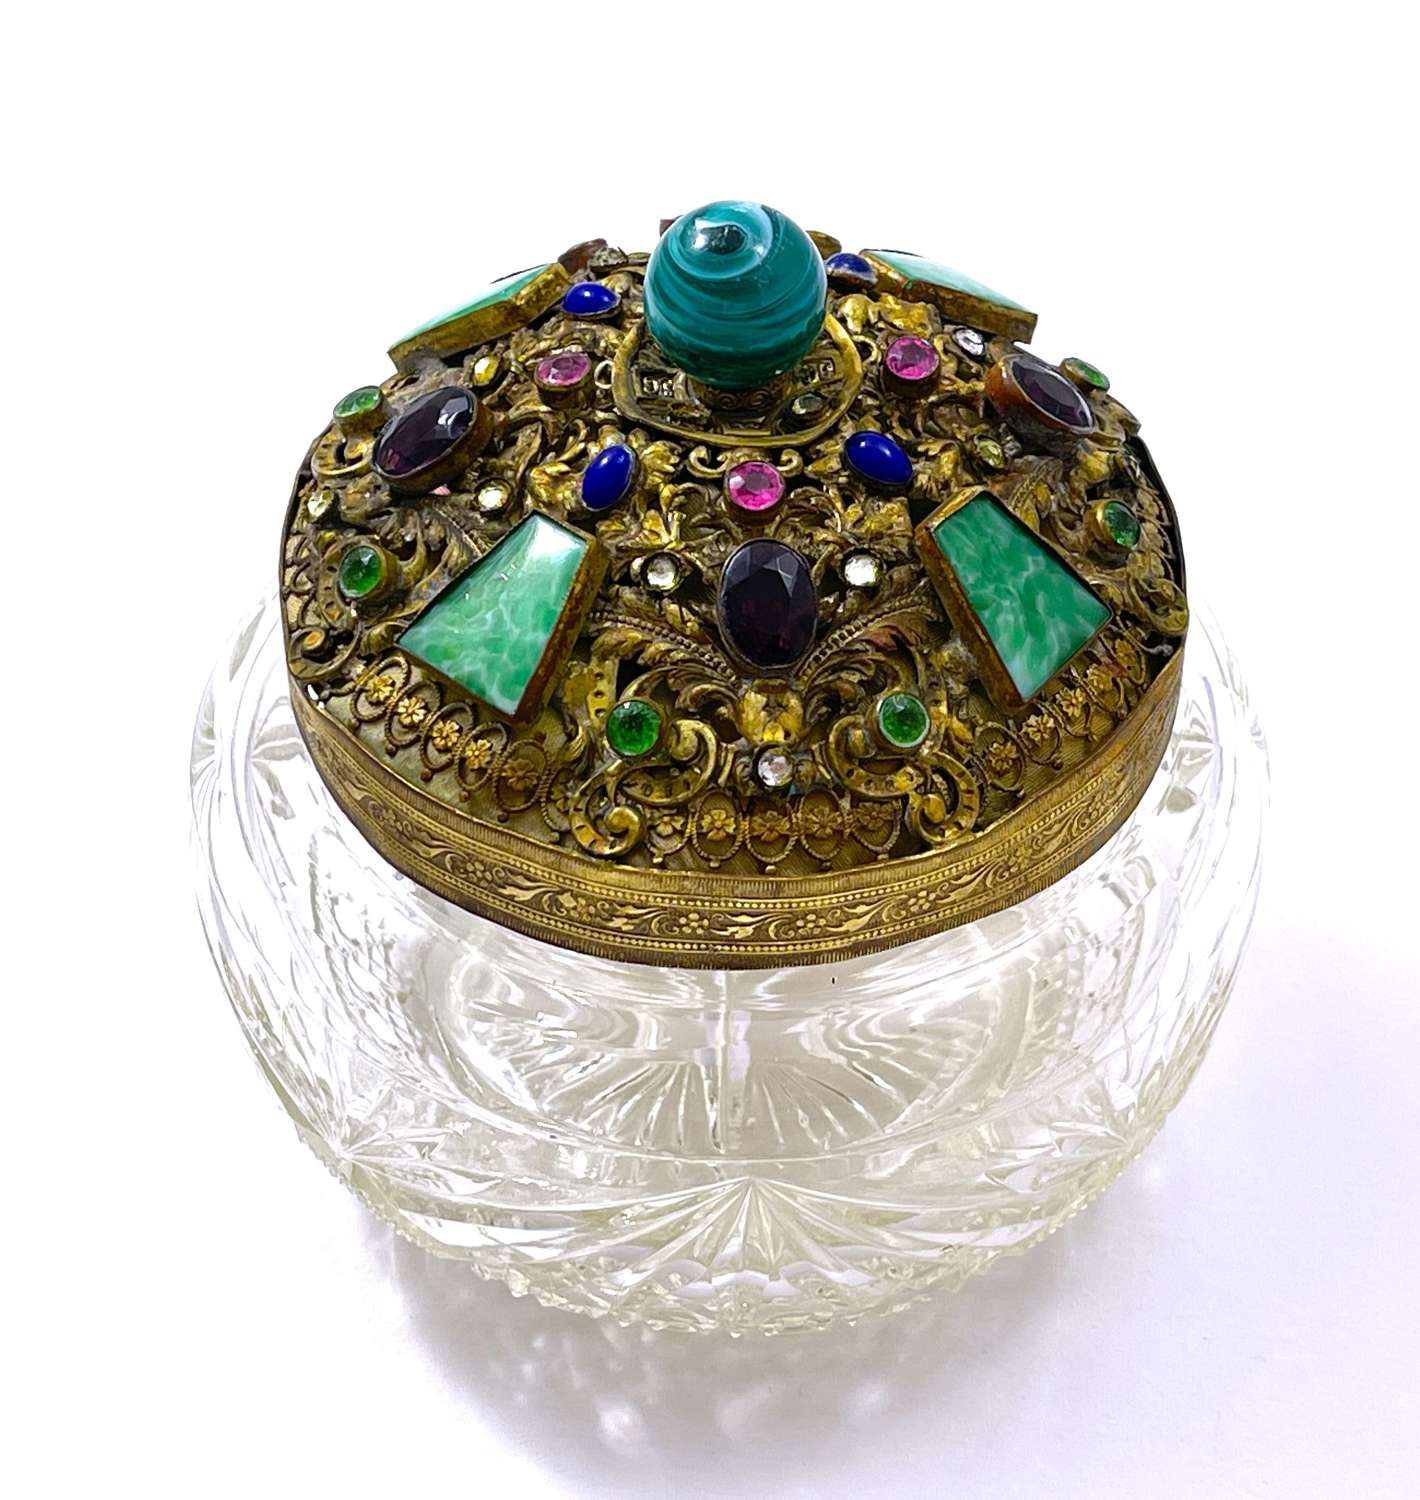 Antique Cut Crystal Box with Dore Bronze Lid Encrusted with Jewels